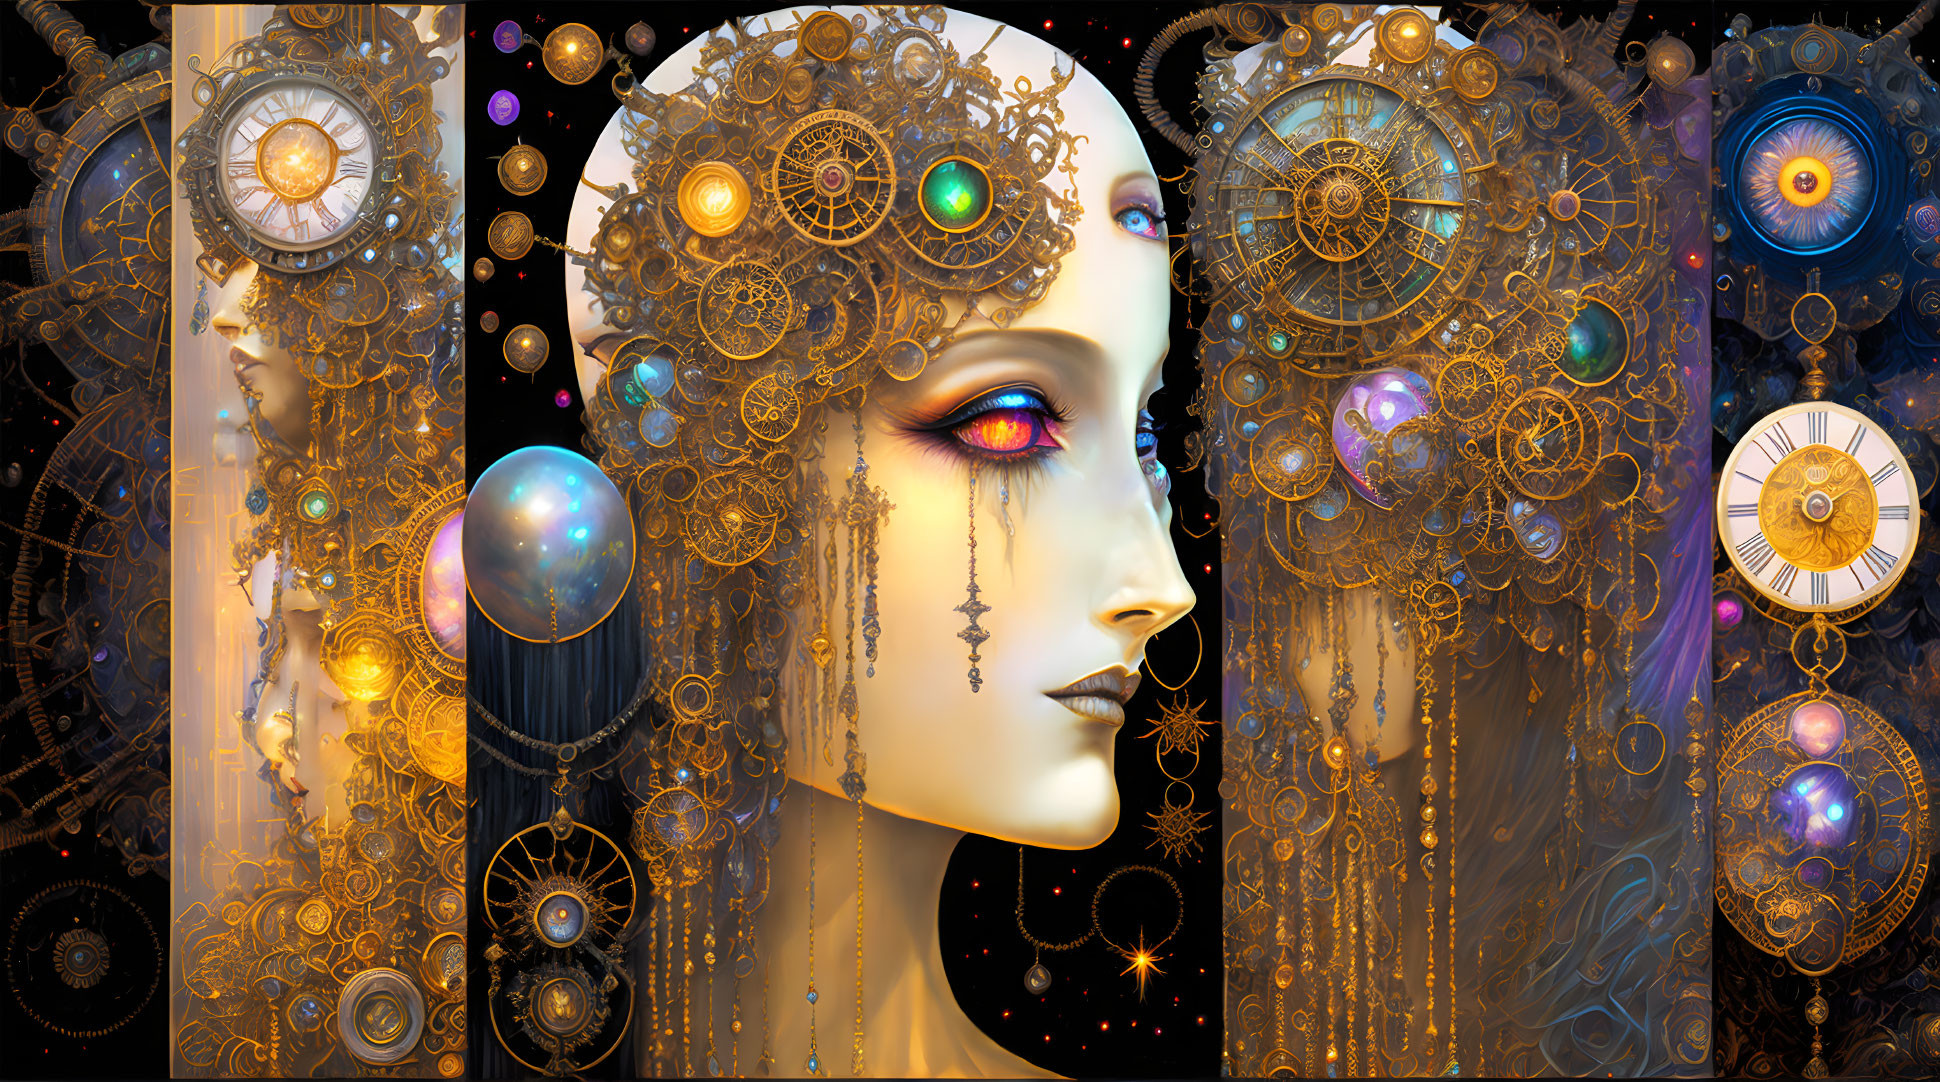 Profile of woman with mechanical and cosmic elements in vibrant colors